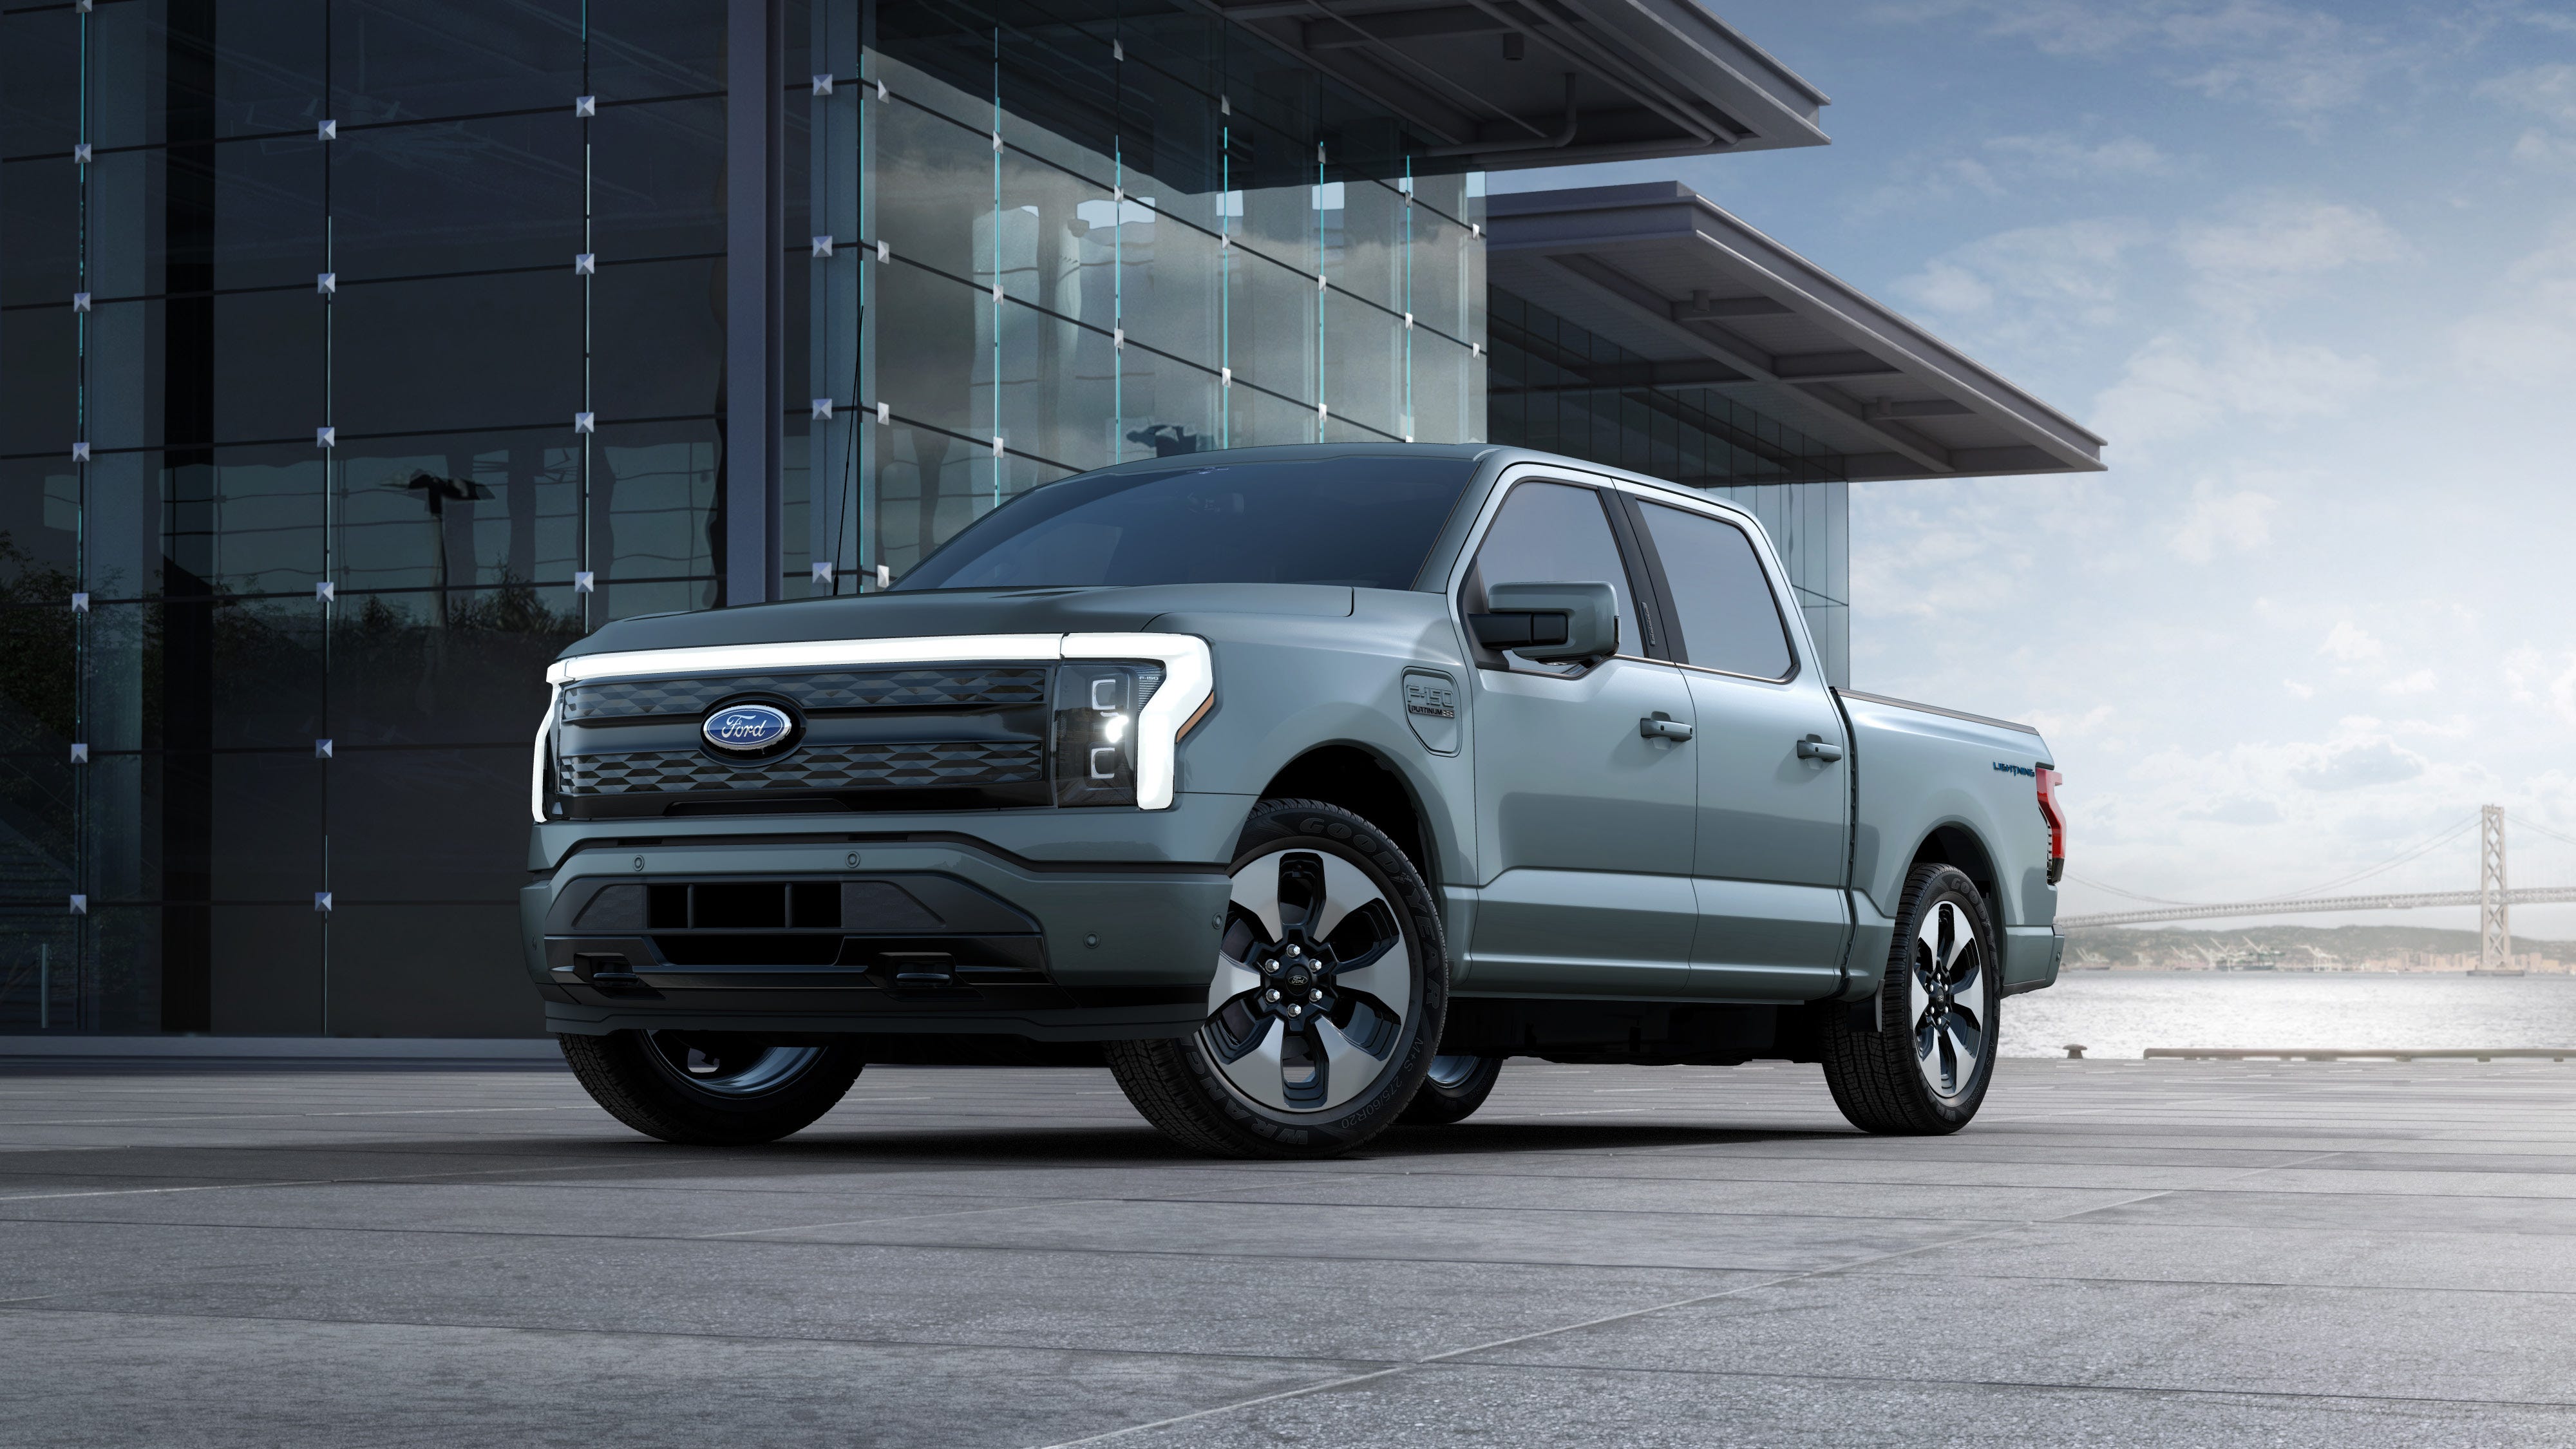 Ford F-150 Lightning pickup costs more to build, price goes up